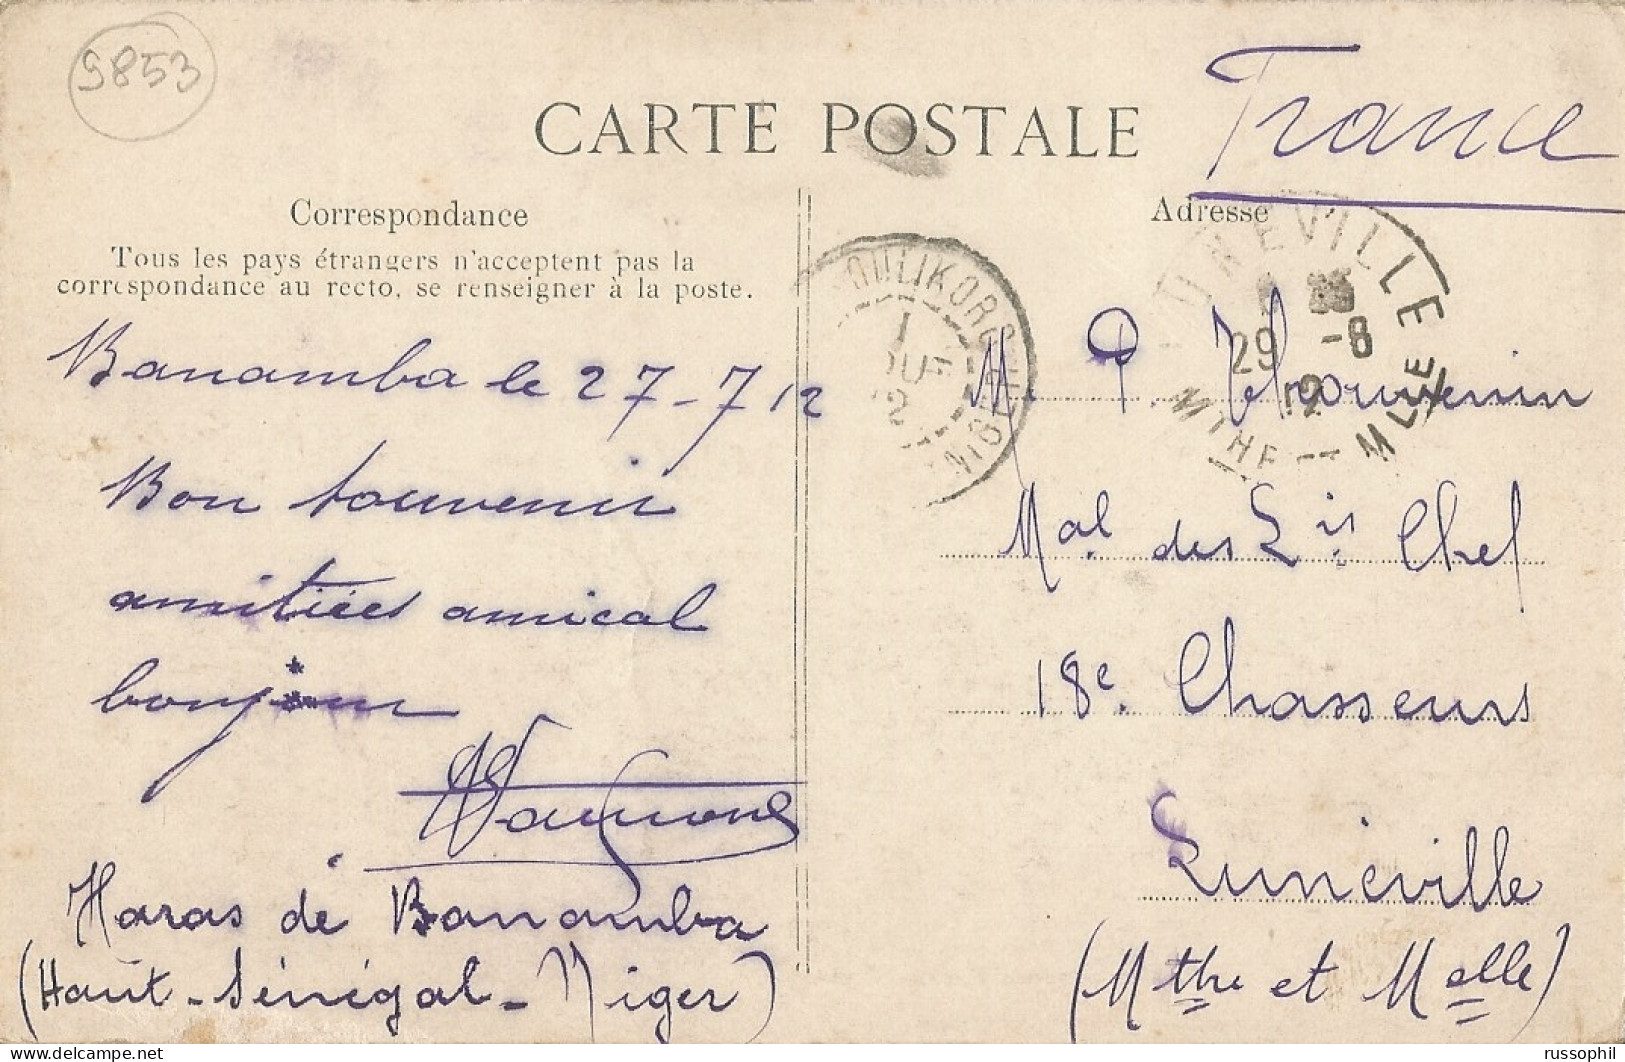 HAUT SENEGAL NIGER - 5 CENT. FAIDHERBE FRANKING PC FROM KOULIKORO TO FRANCE - 1912 - Lettres & Documents